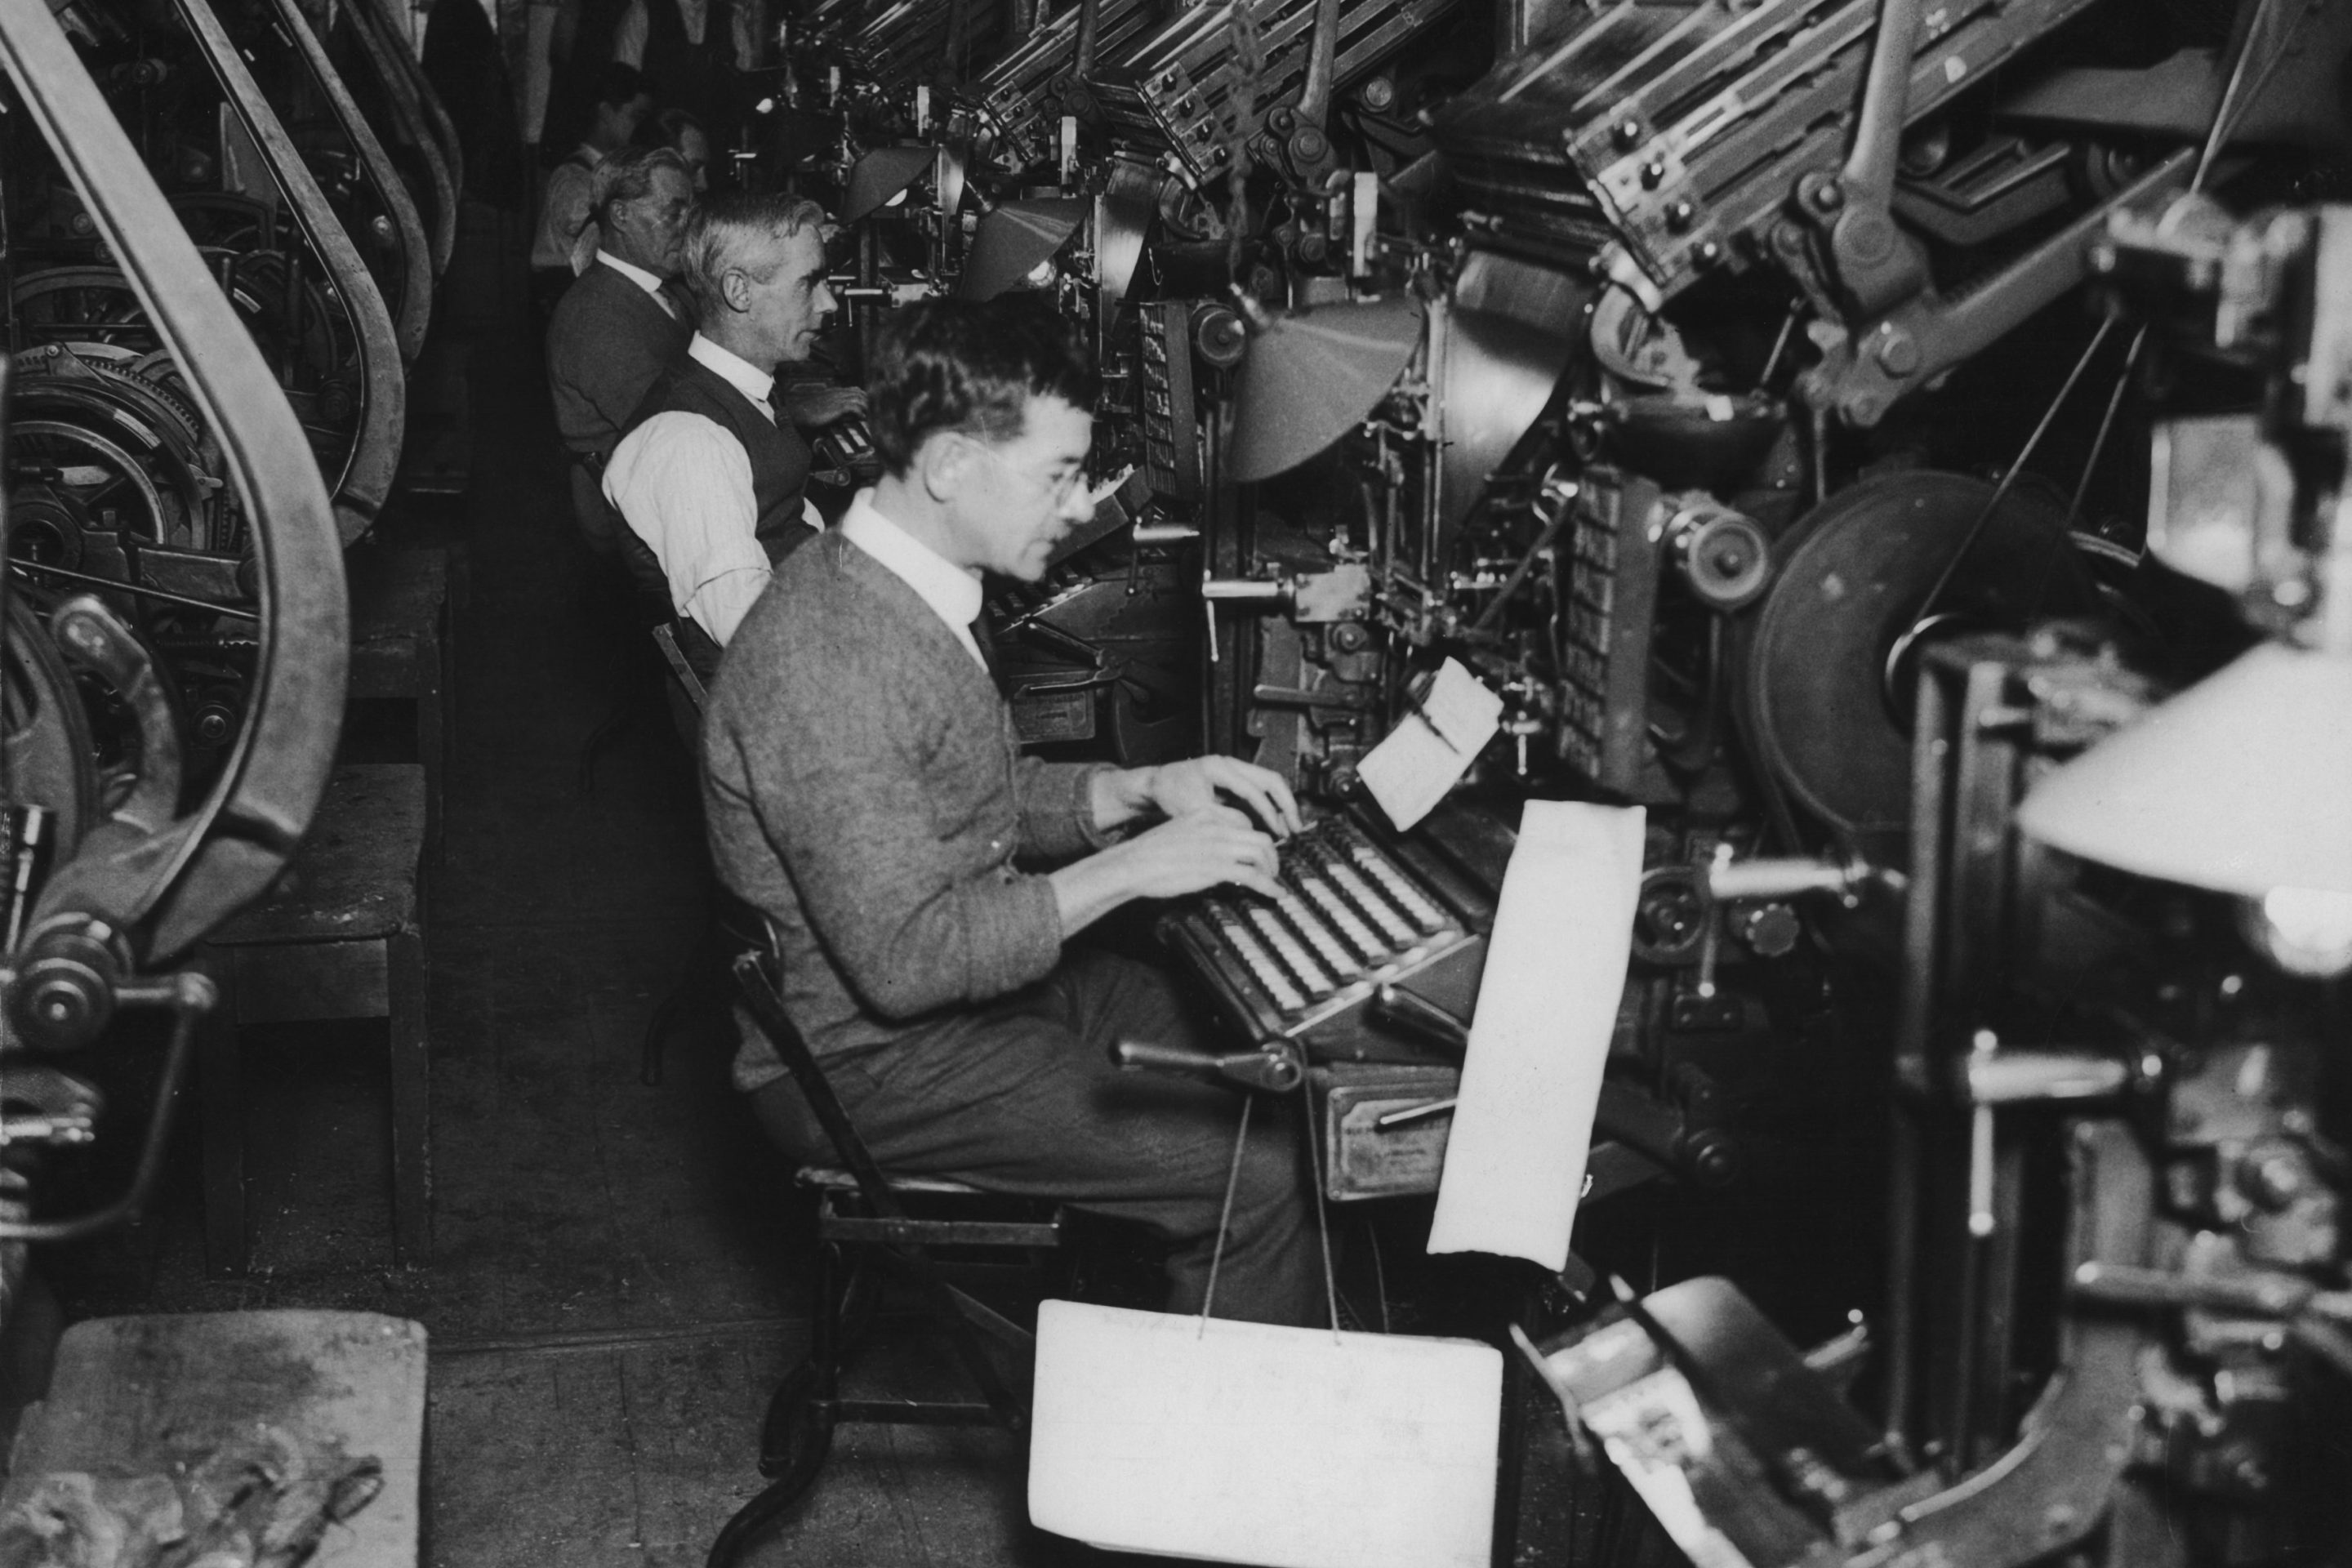 The linotype department of a large London newspaper, circa 1930.